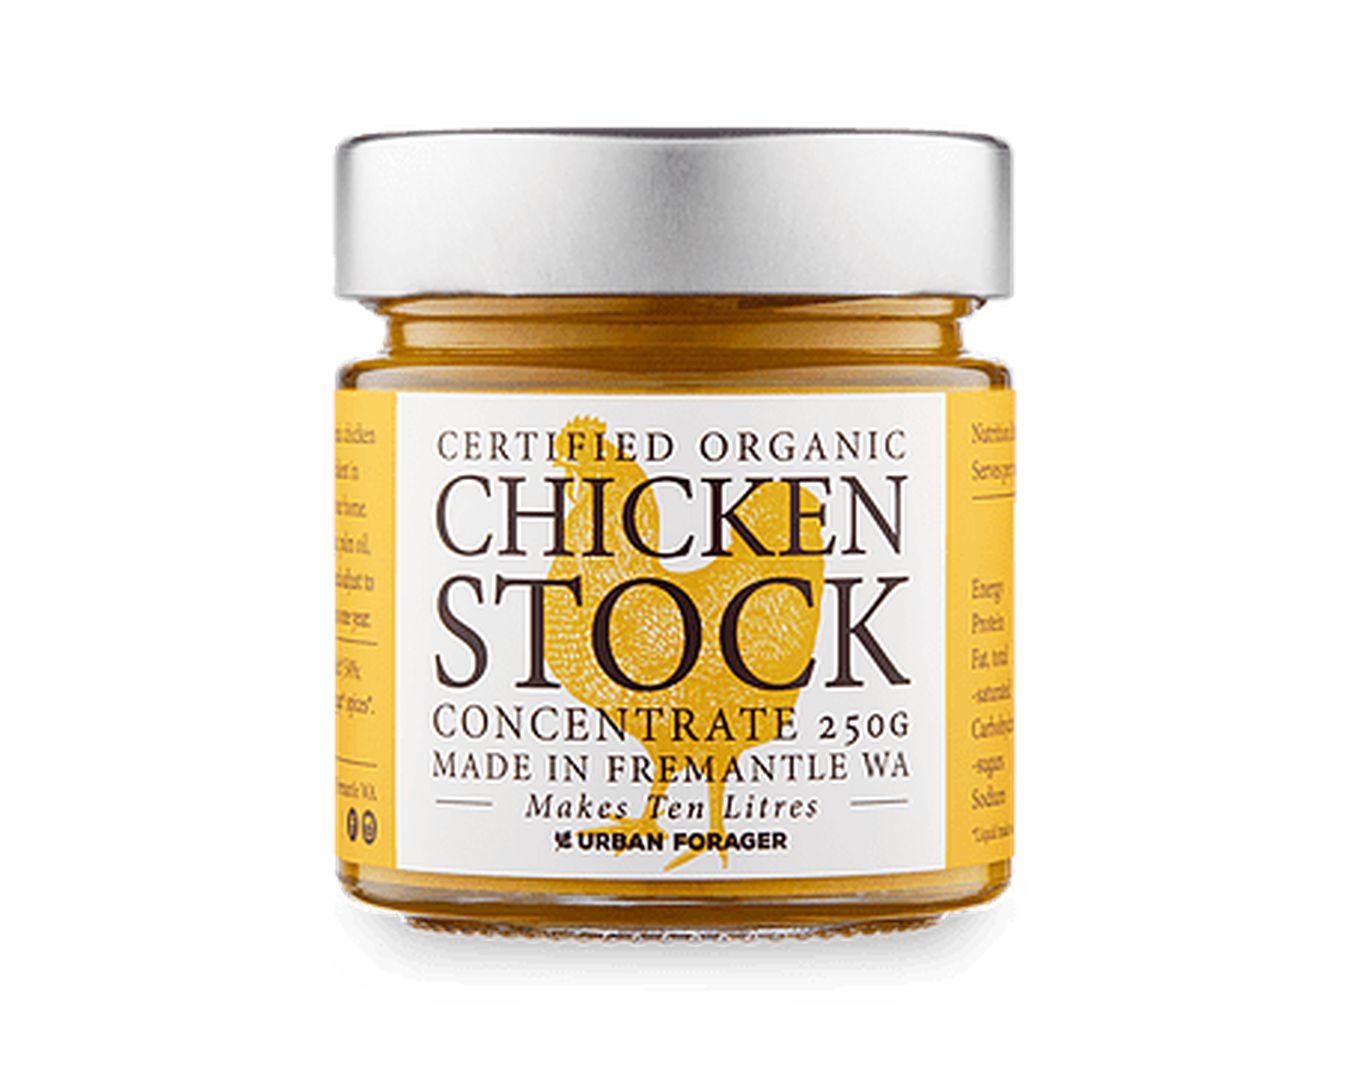 Urban Forager Chicken Stock Concentrate 250g-Stock-The Local Basket